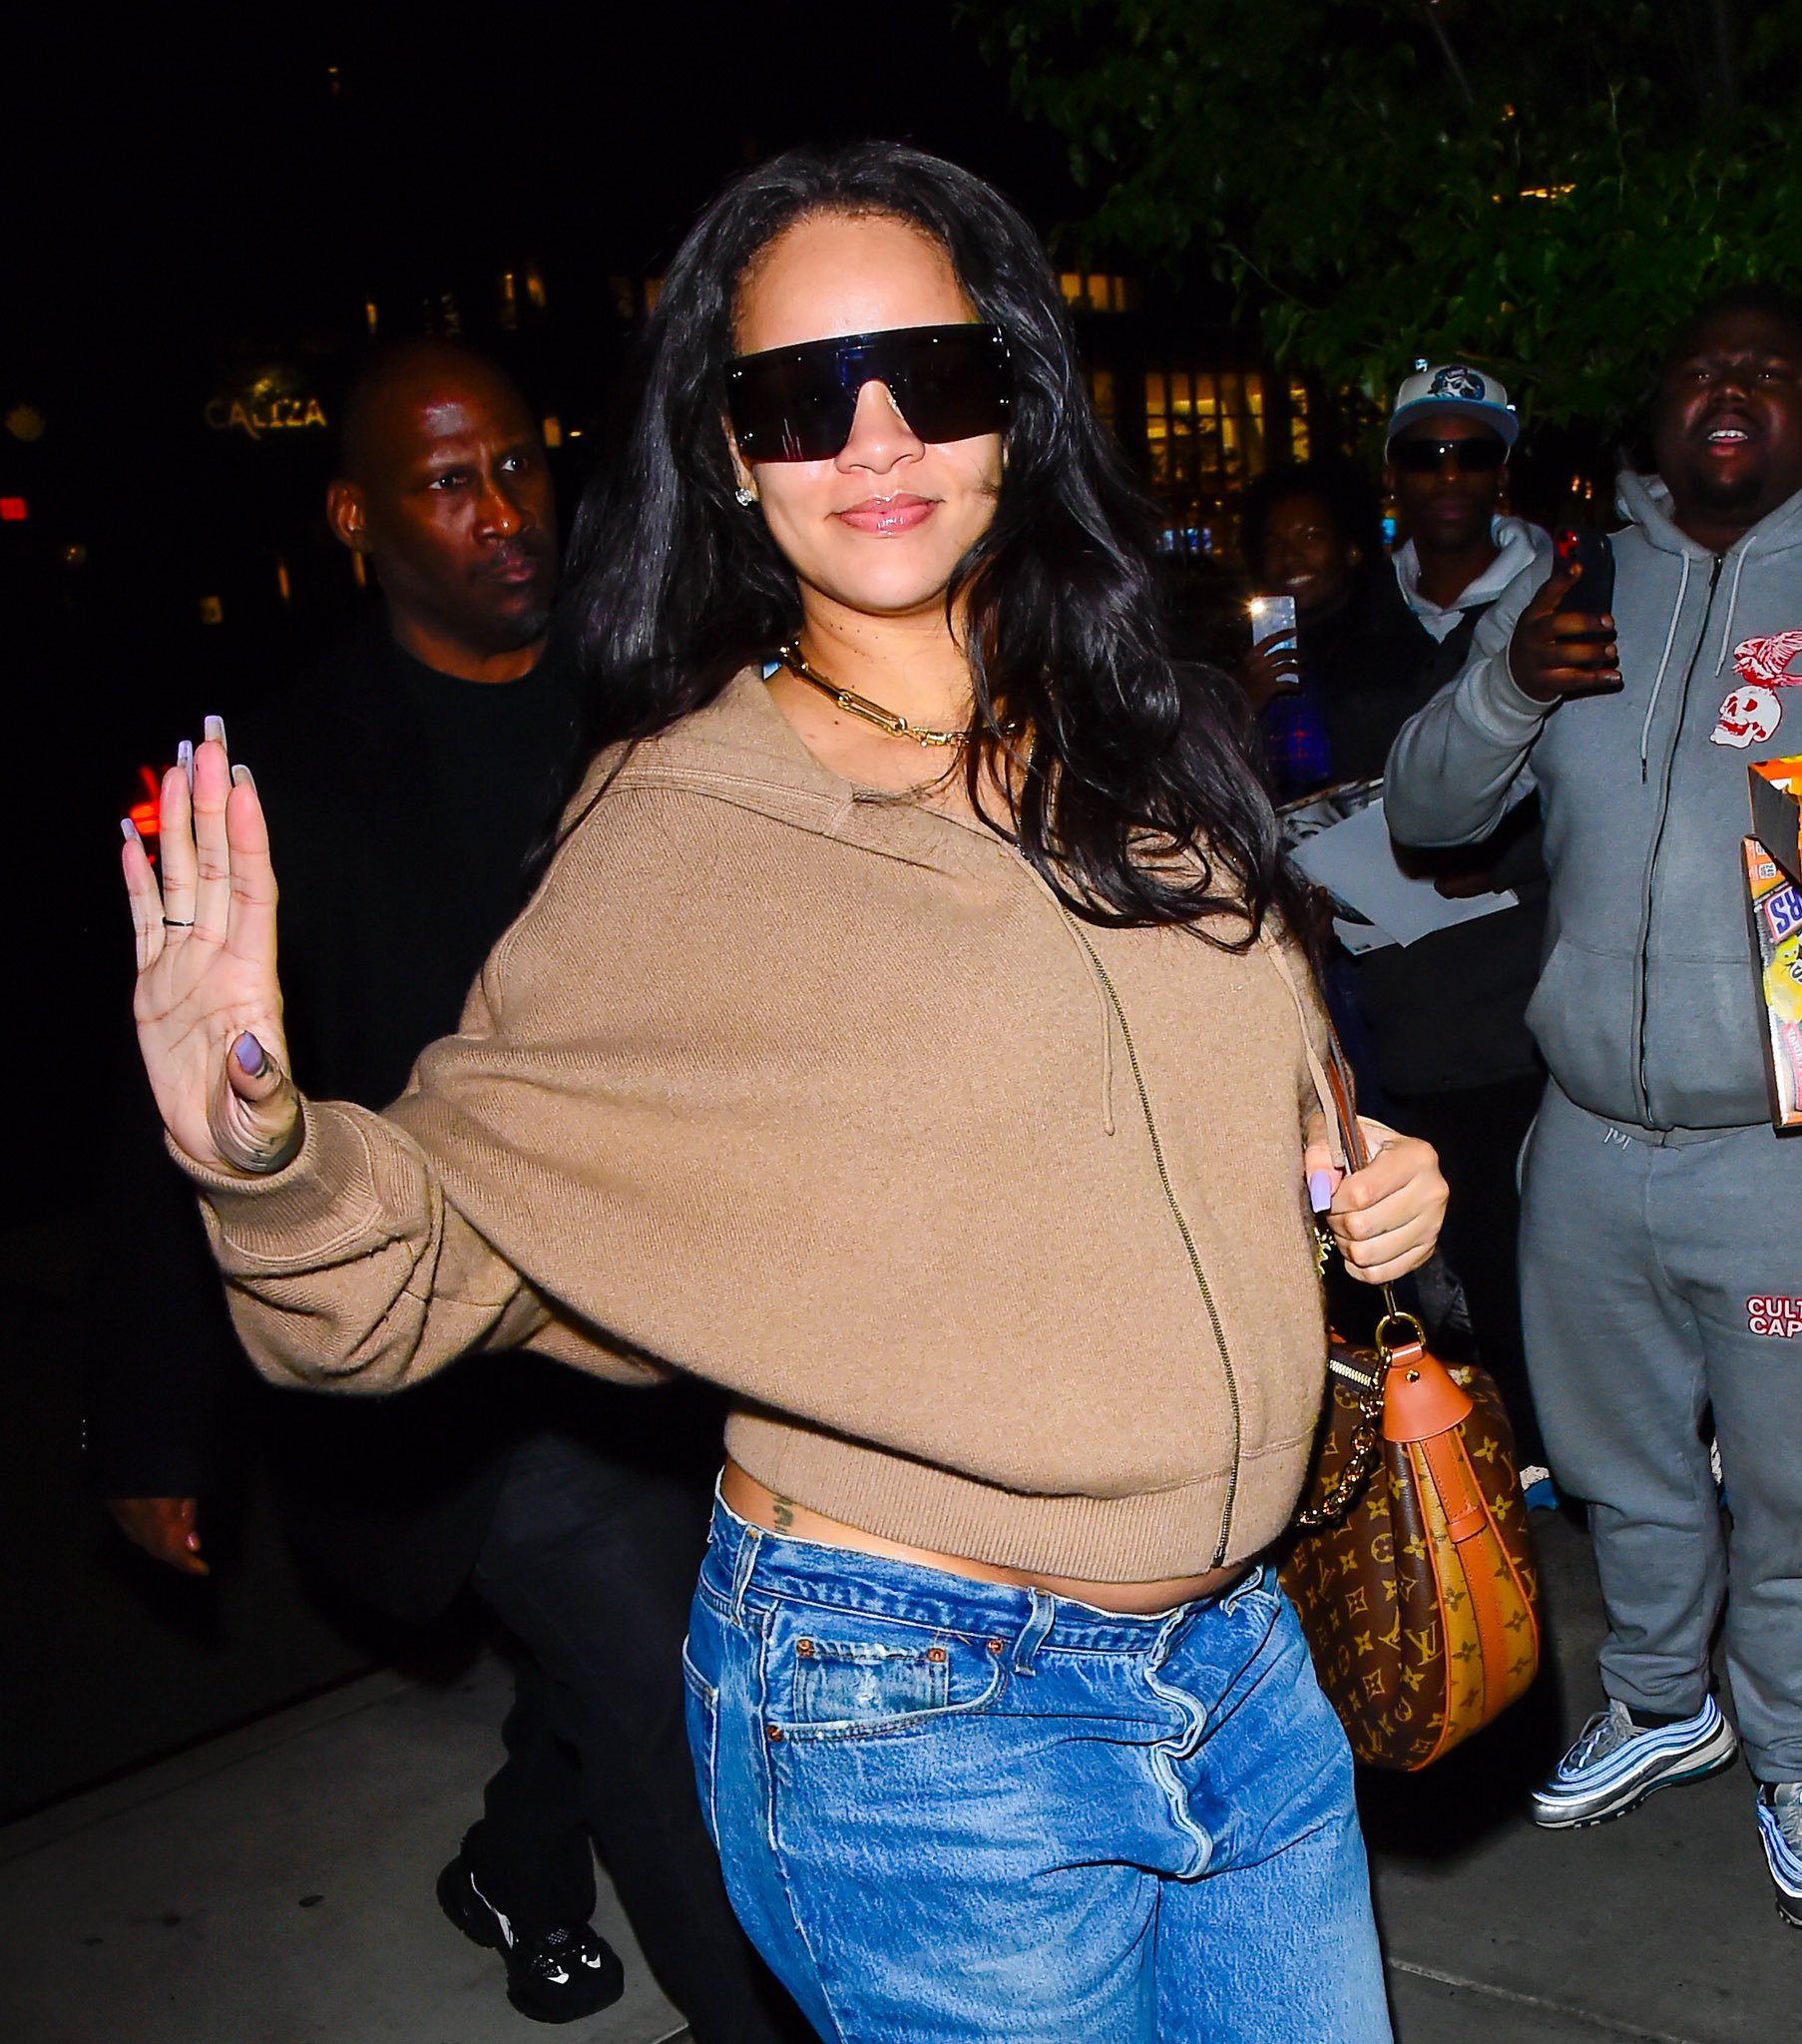 Rihanna Returns to Her Hotel After Day Out in NYC: Photo 4924550